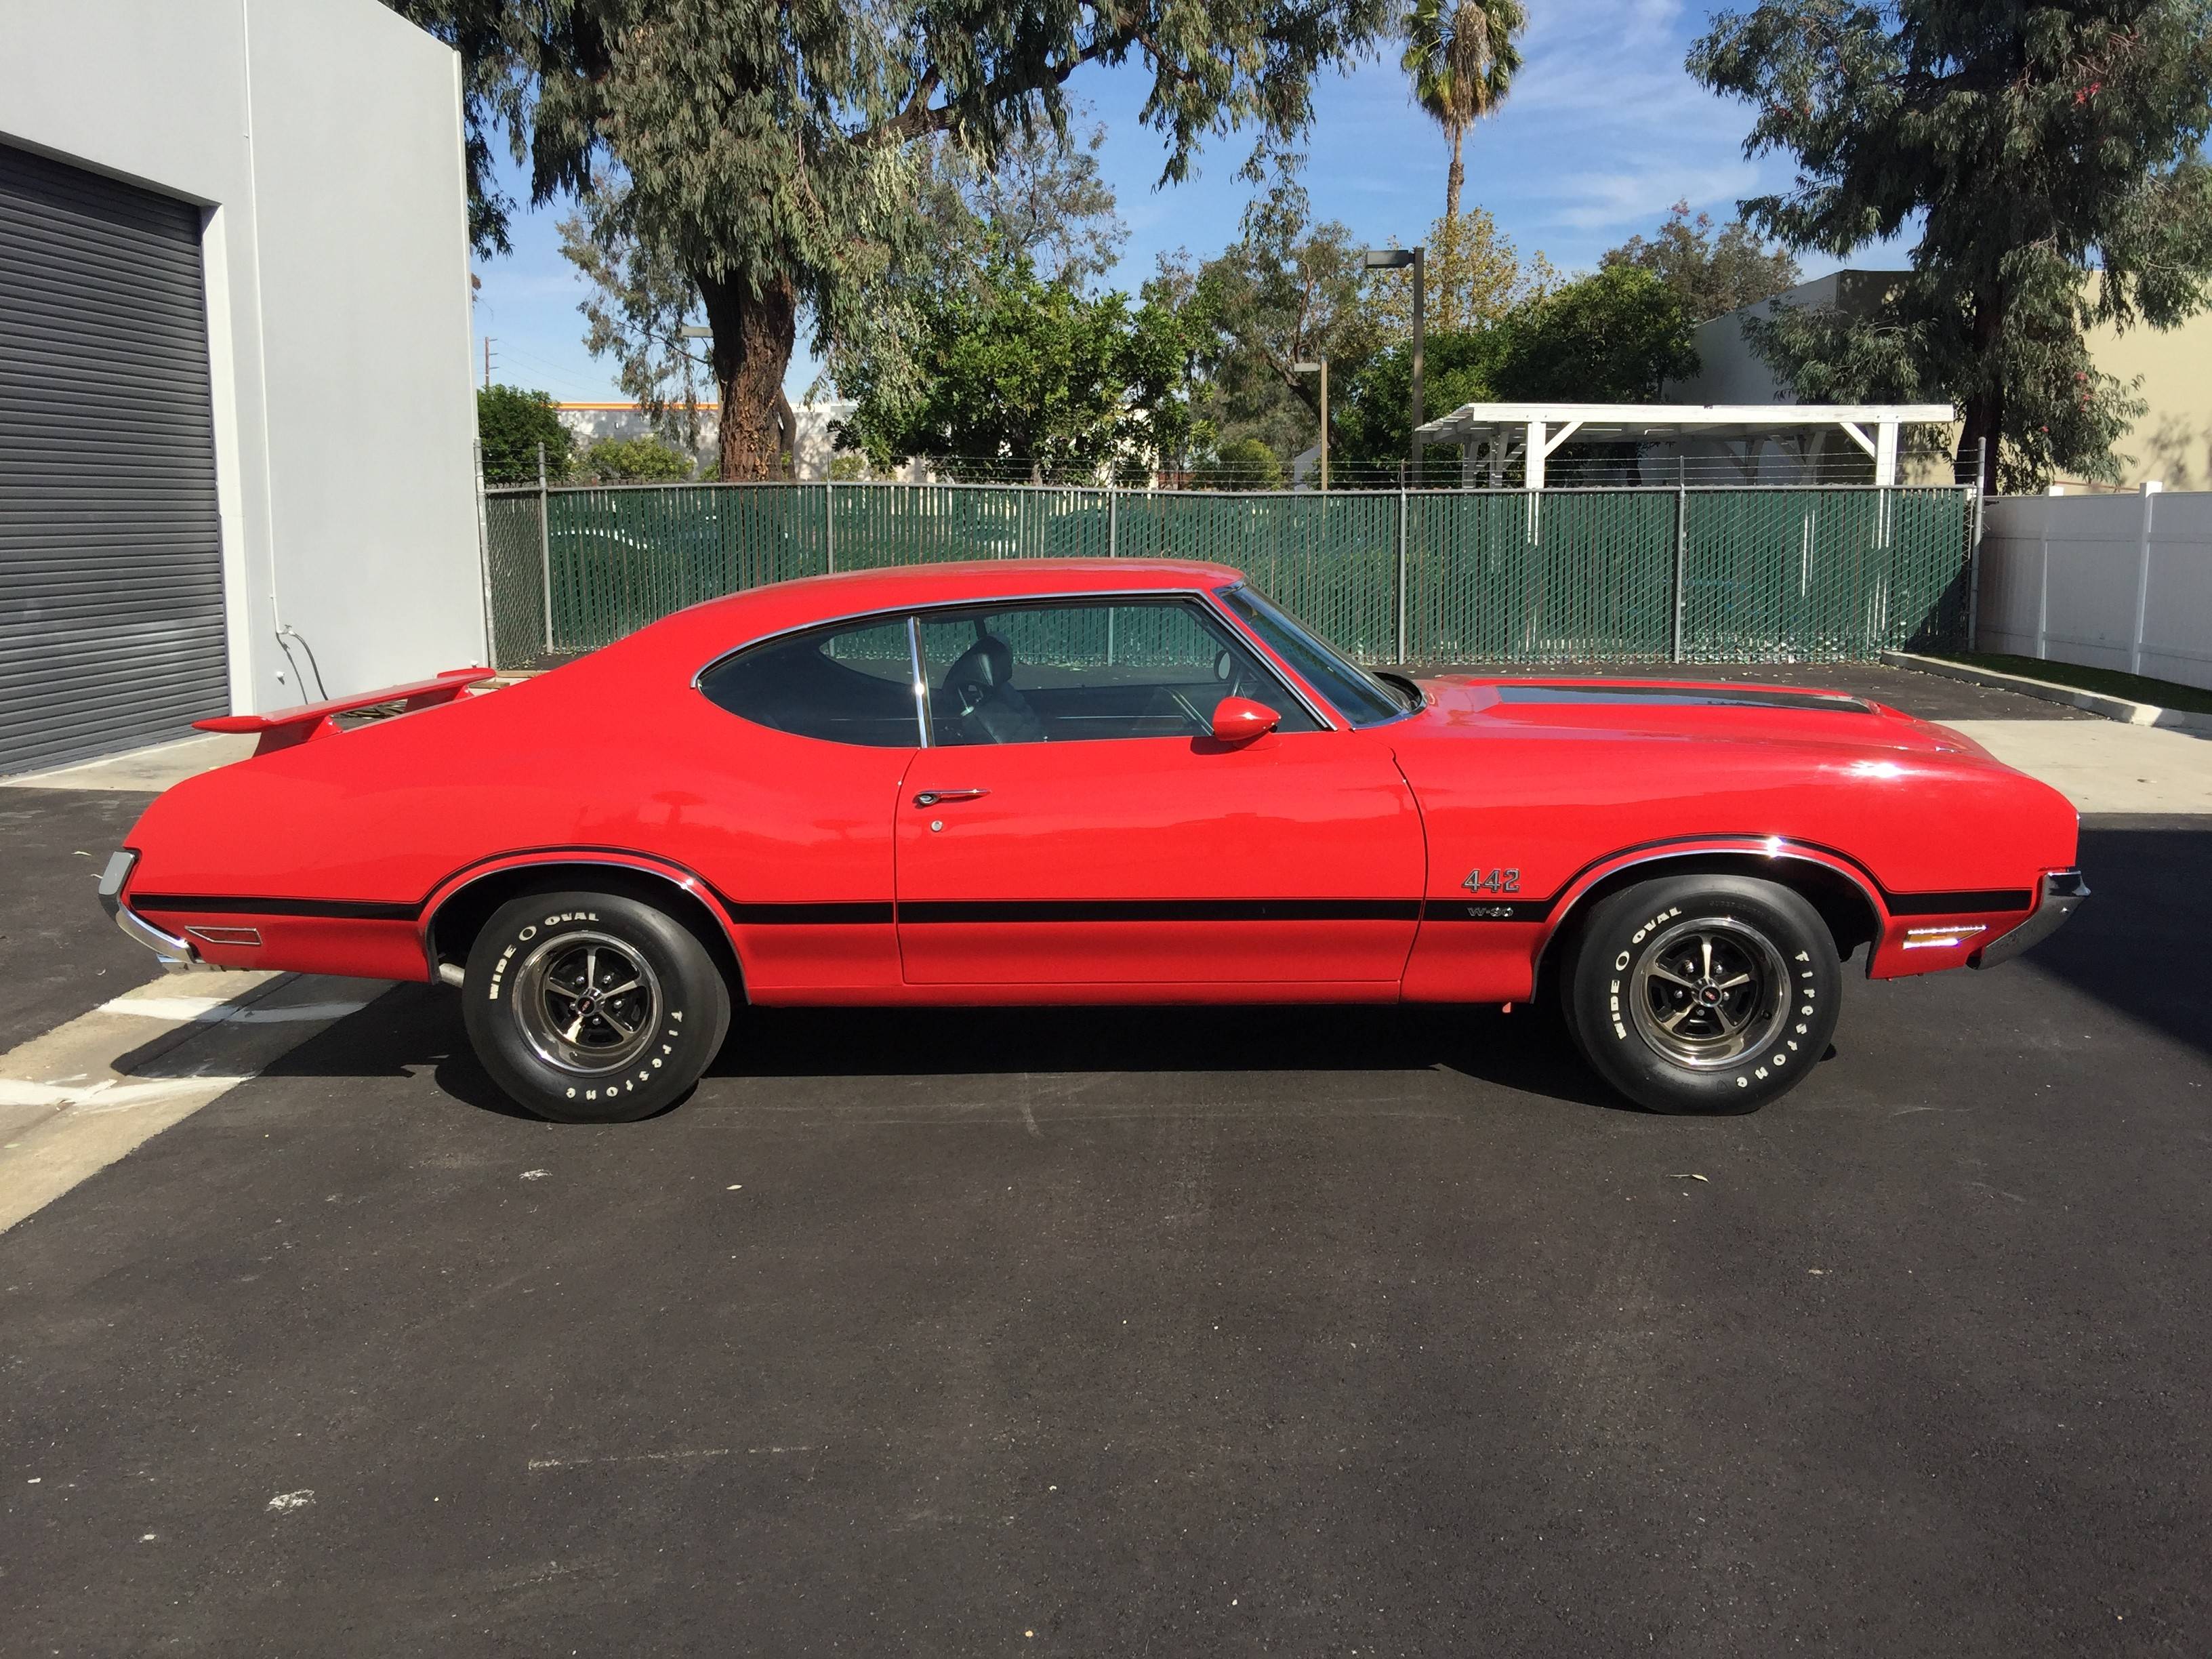 10 Things Everyone Forgot About The Oldsmobile 442